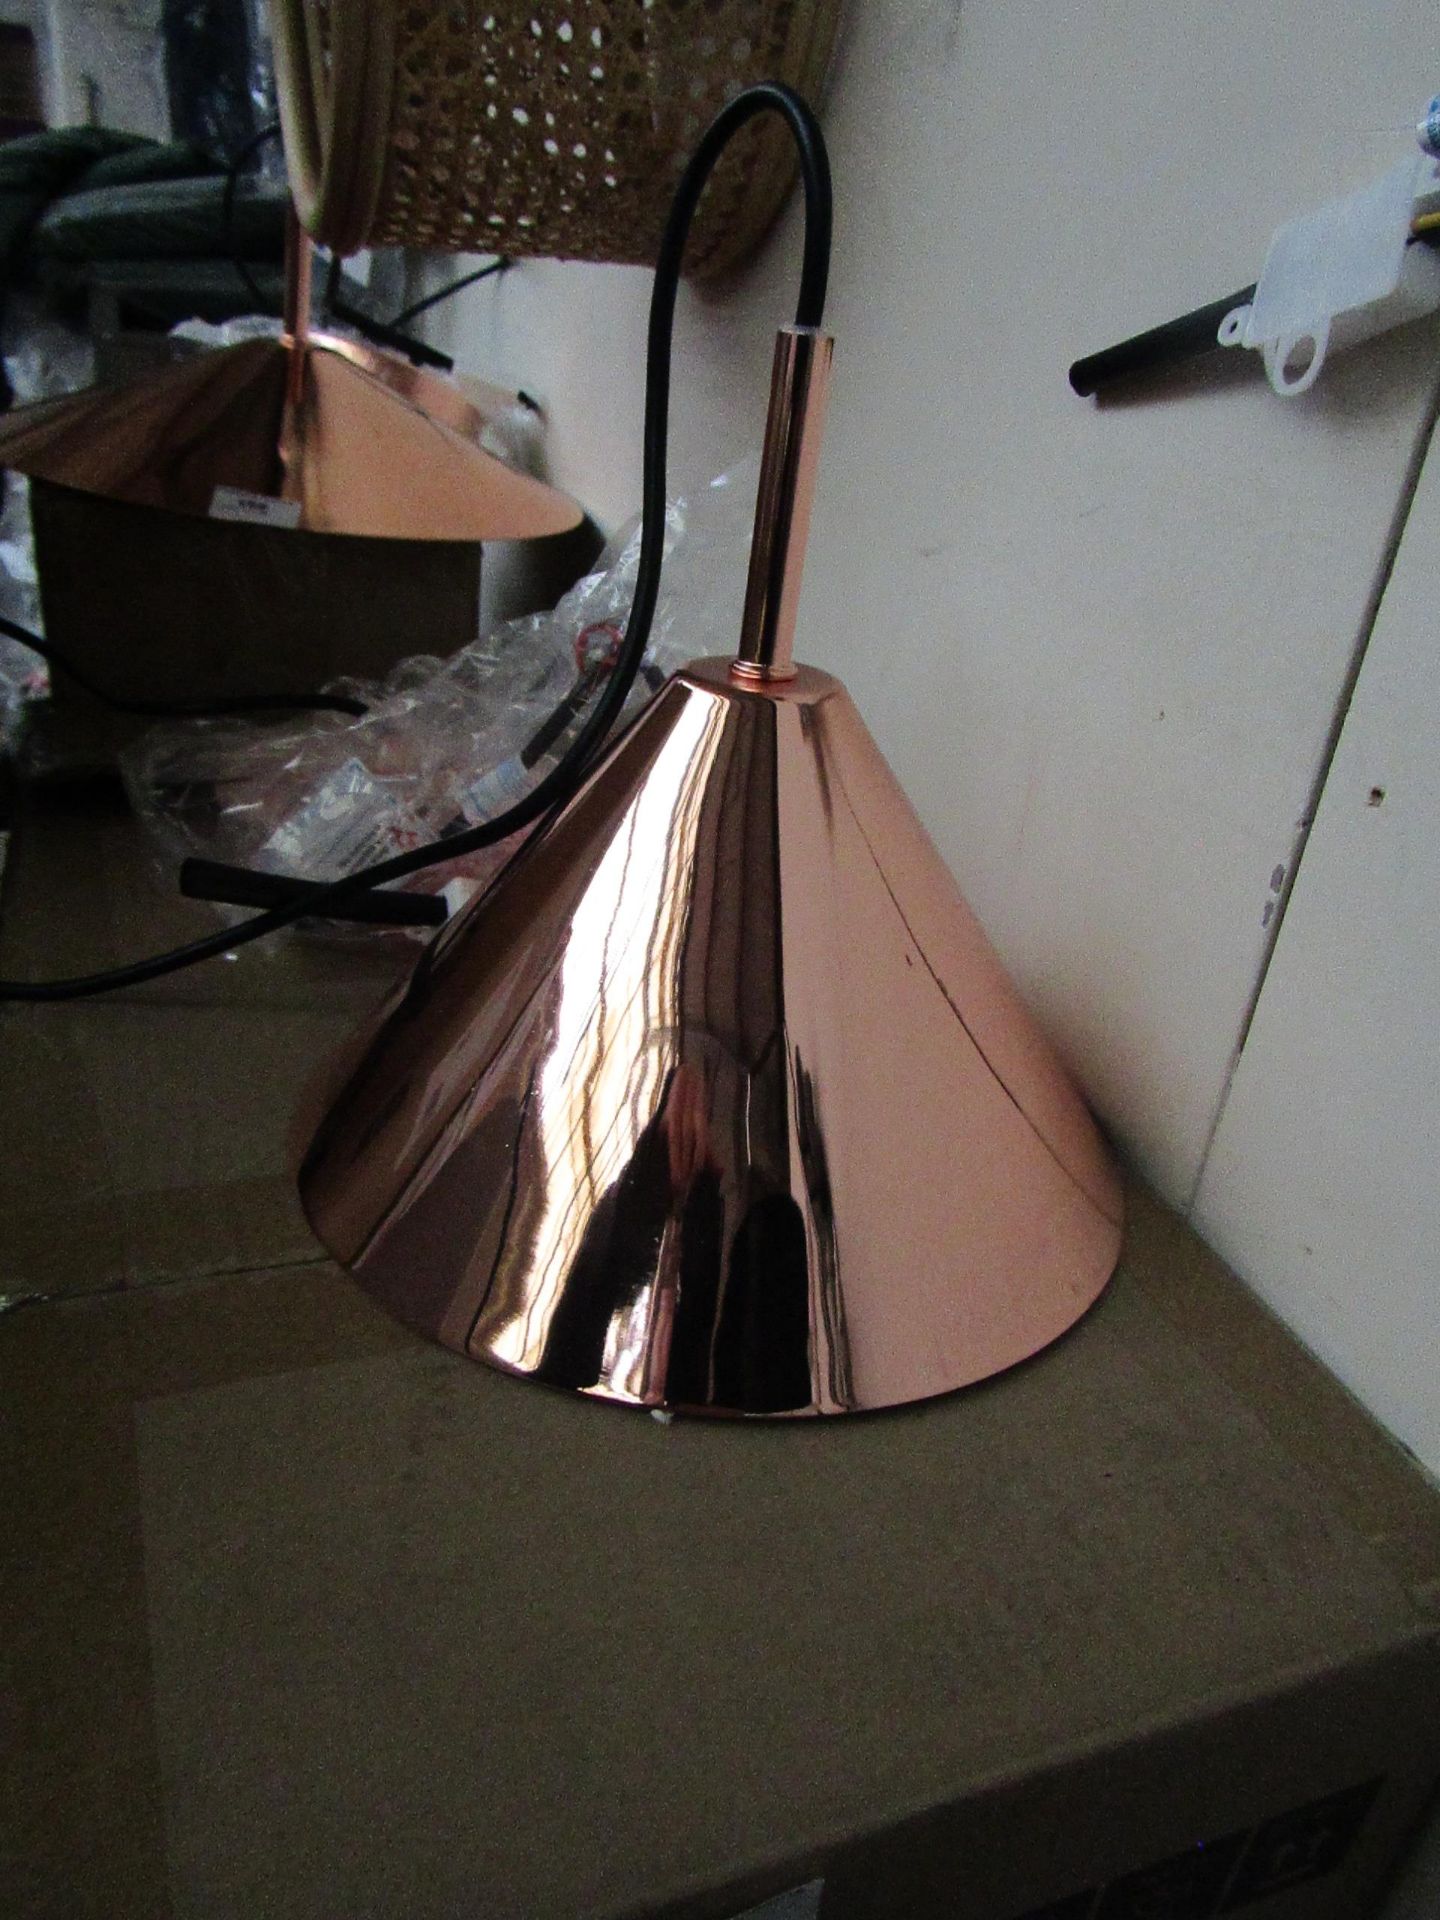 | 1X | SWOON ALI PENDANT LIGHT IN COPPER| UNCHECKED AND IN ORIGINAL BOX | RRP £69 |